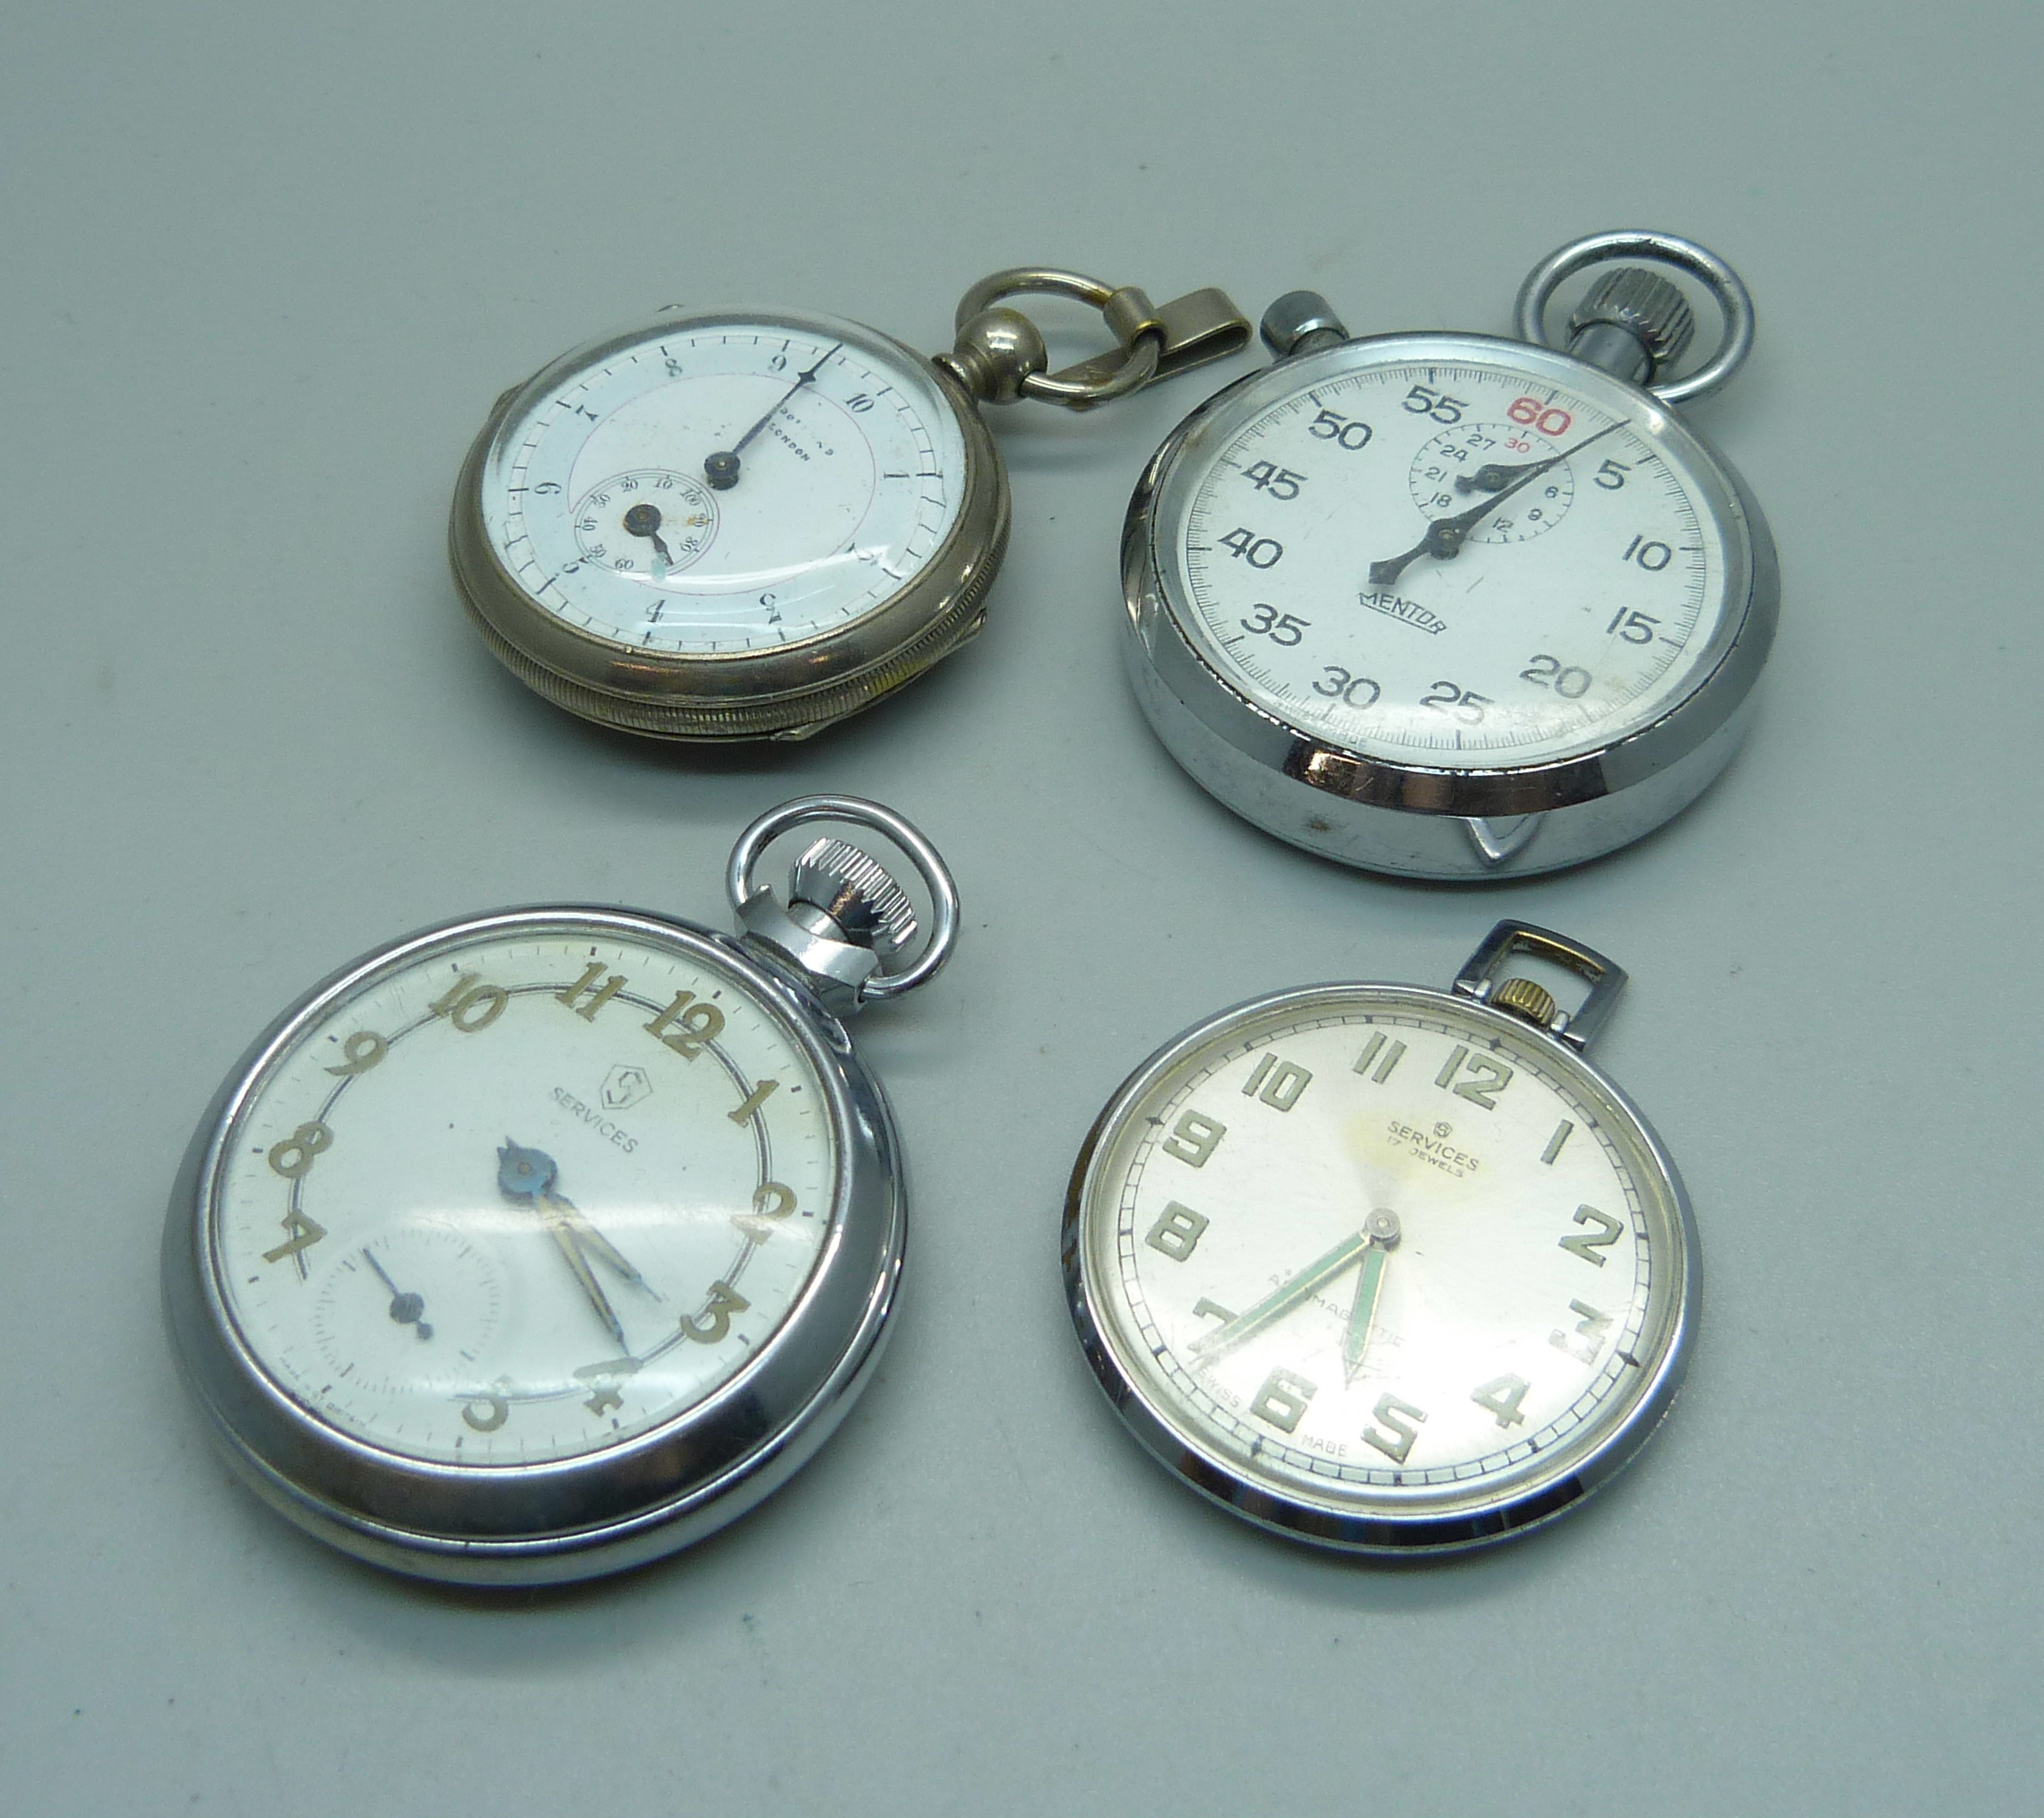 Two pocket watches, a stop watch and a pedometer